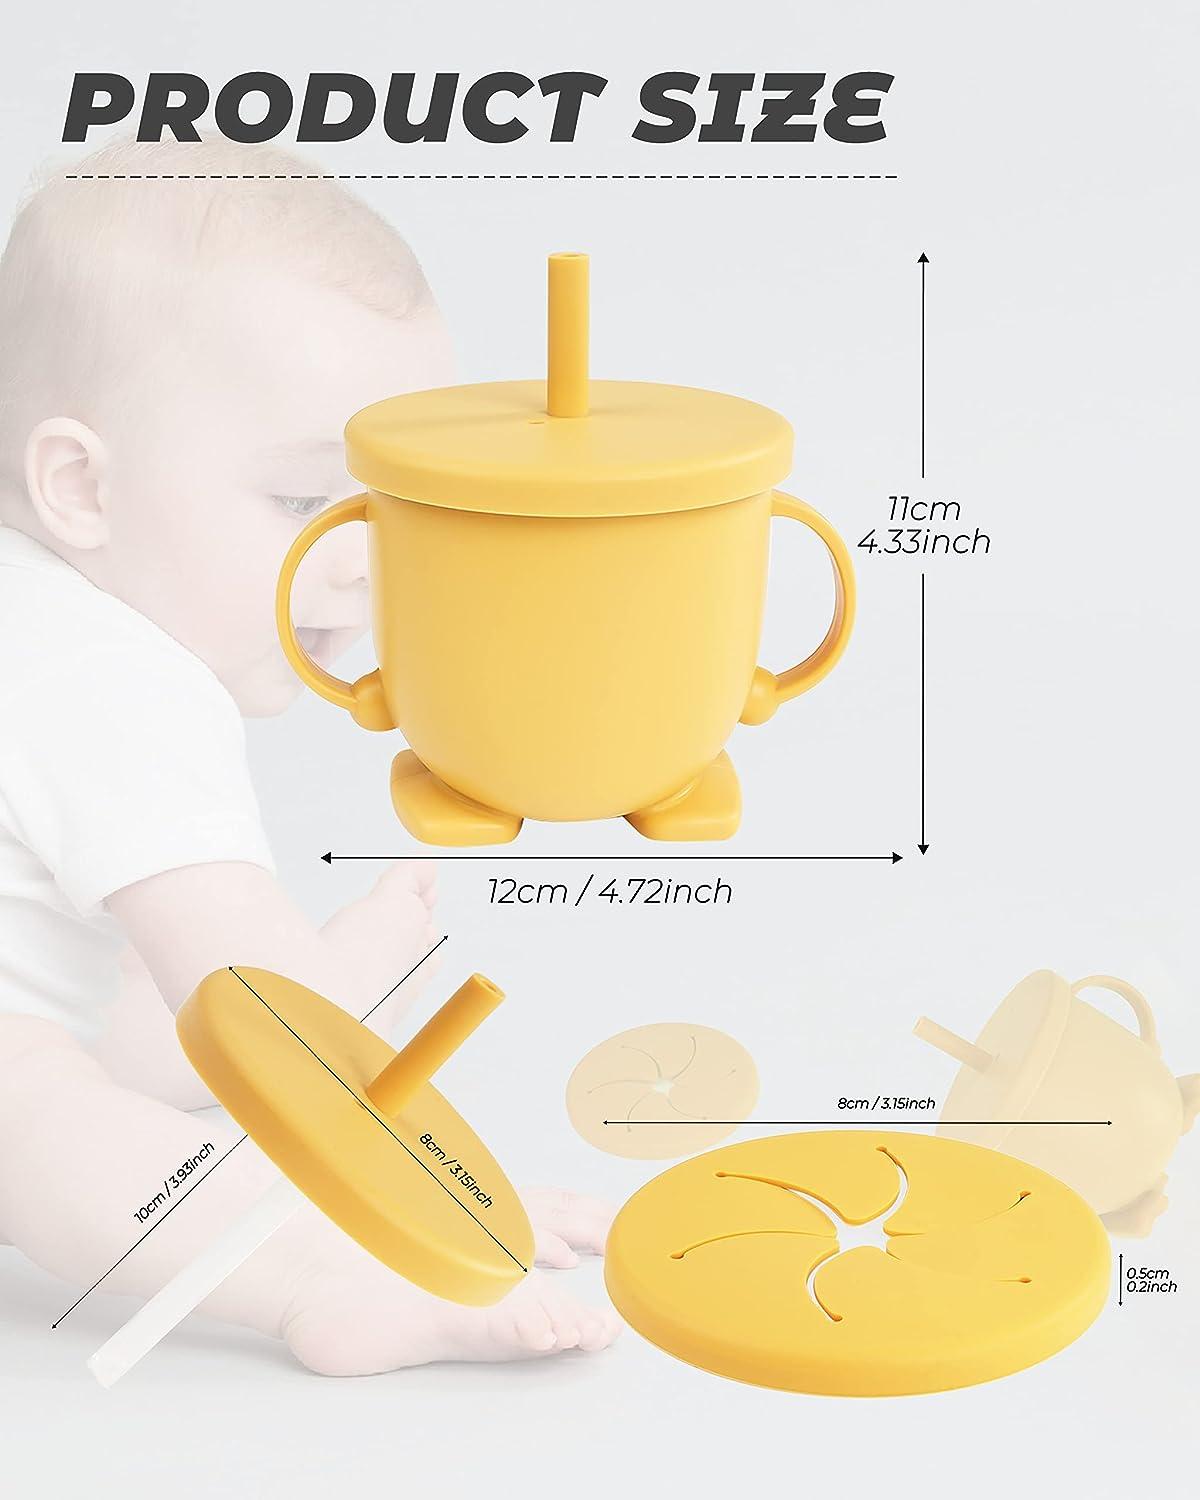 Baby Training Cup | 100% Food-grade Silicone